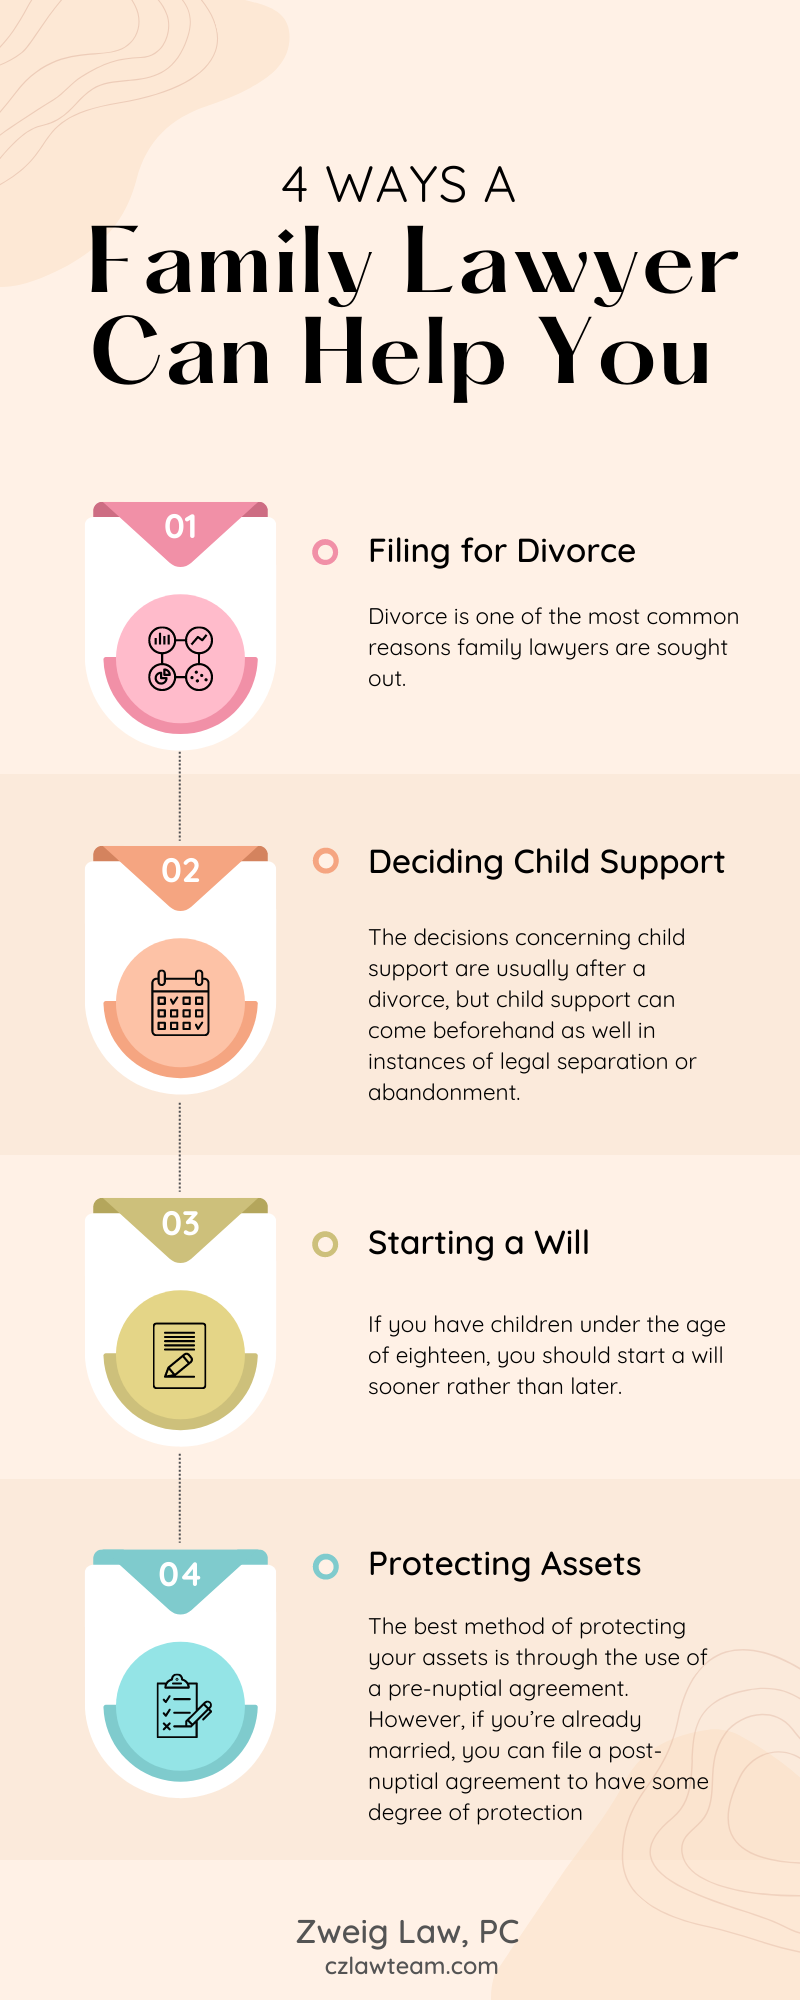 4 Ways a Family Lawyer Can Help You Infographic